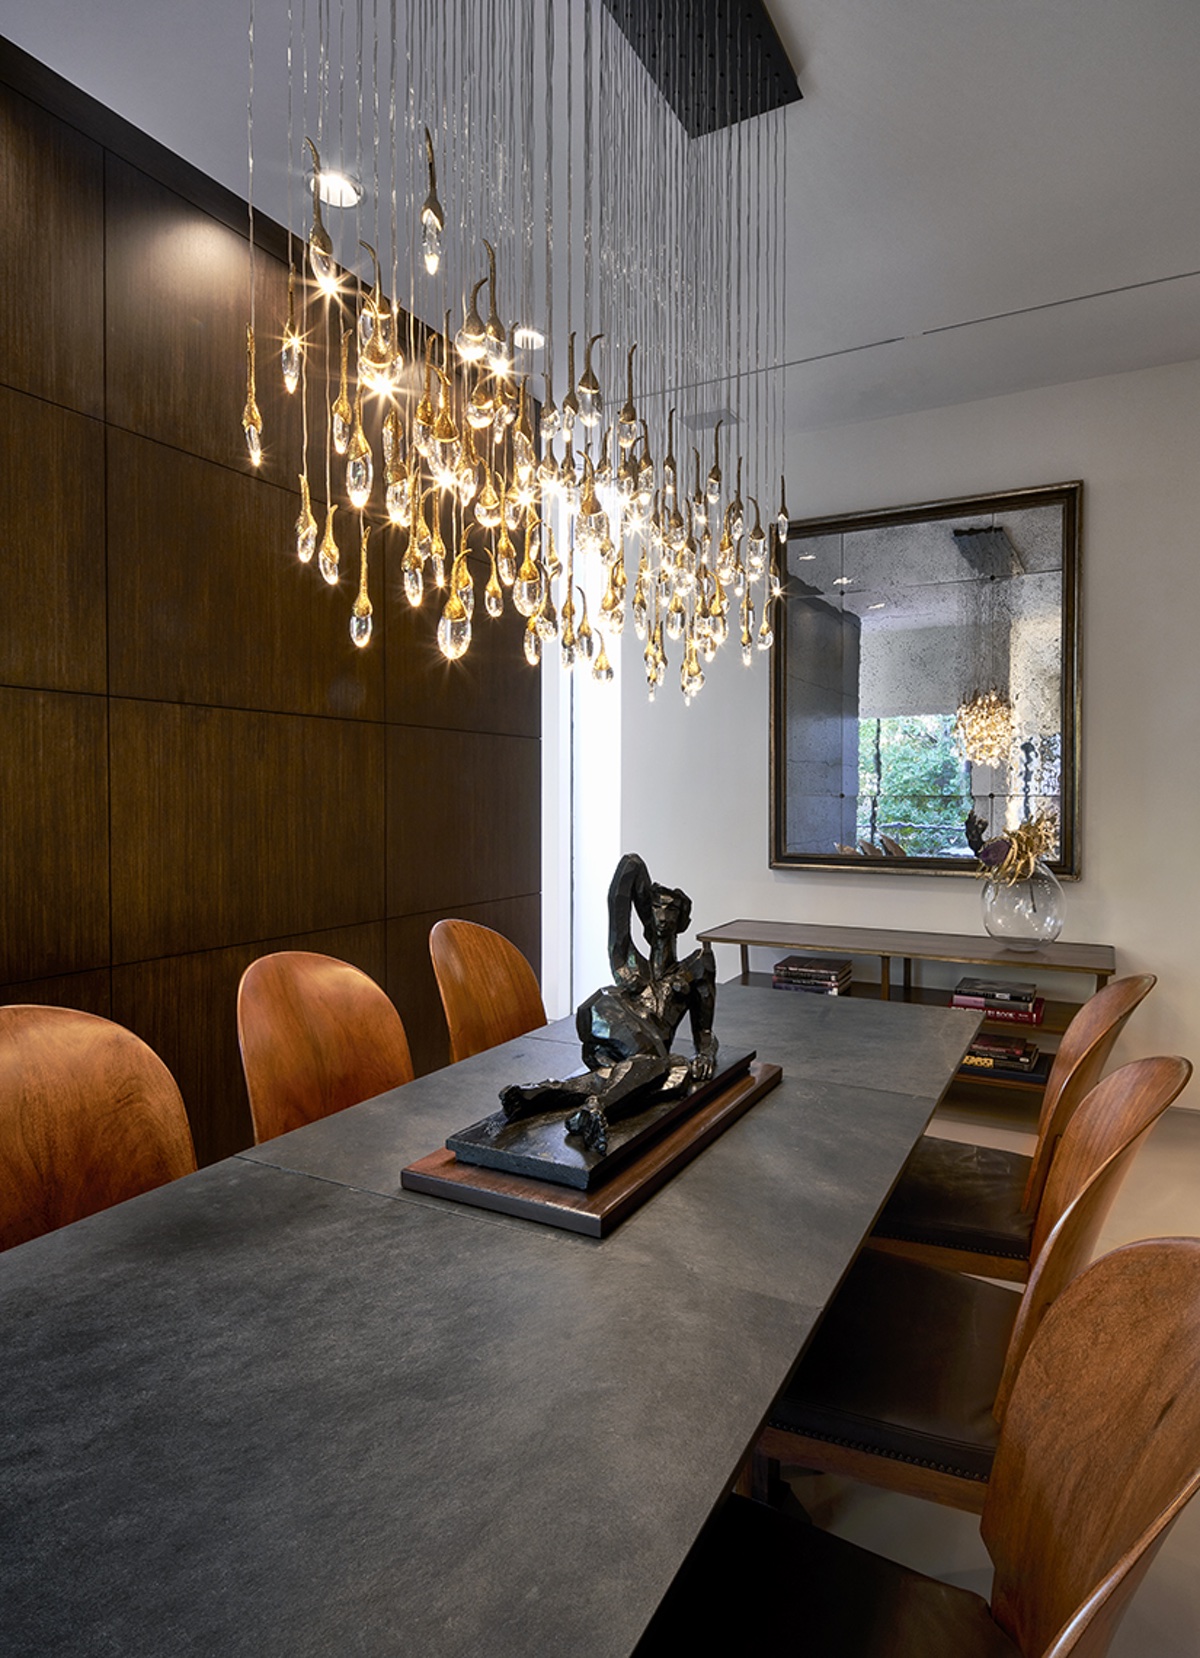 View of dining table with lights dangling from chandelier